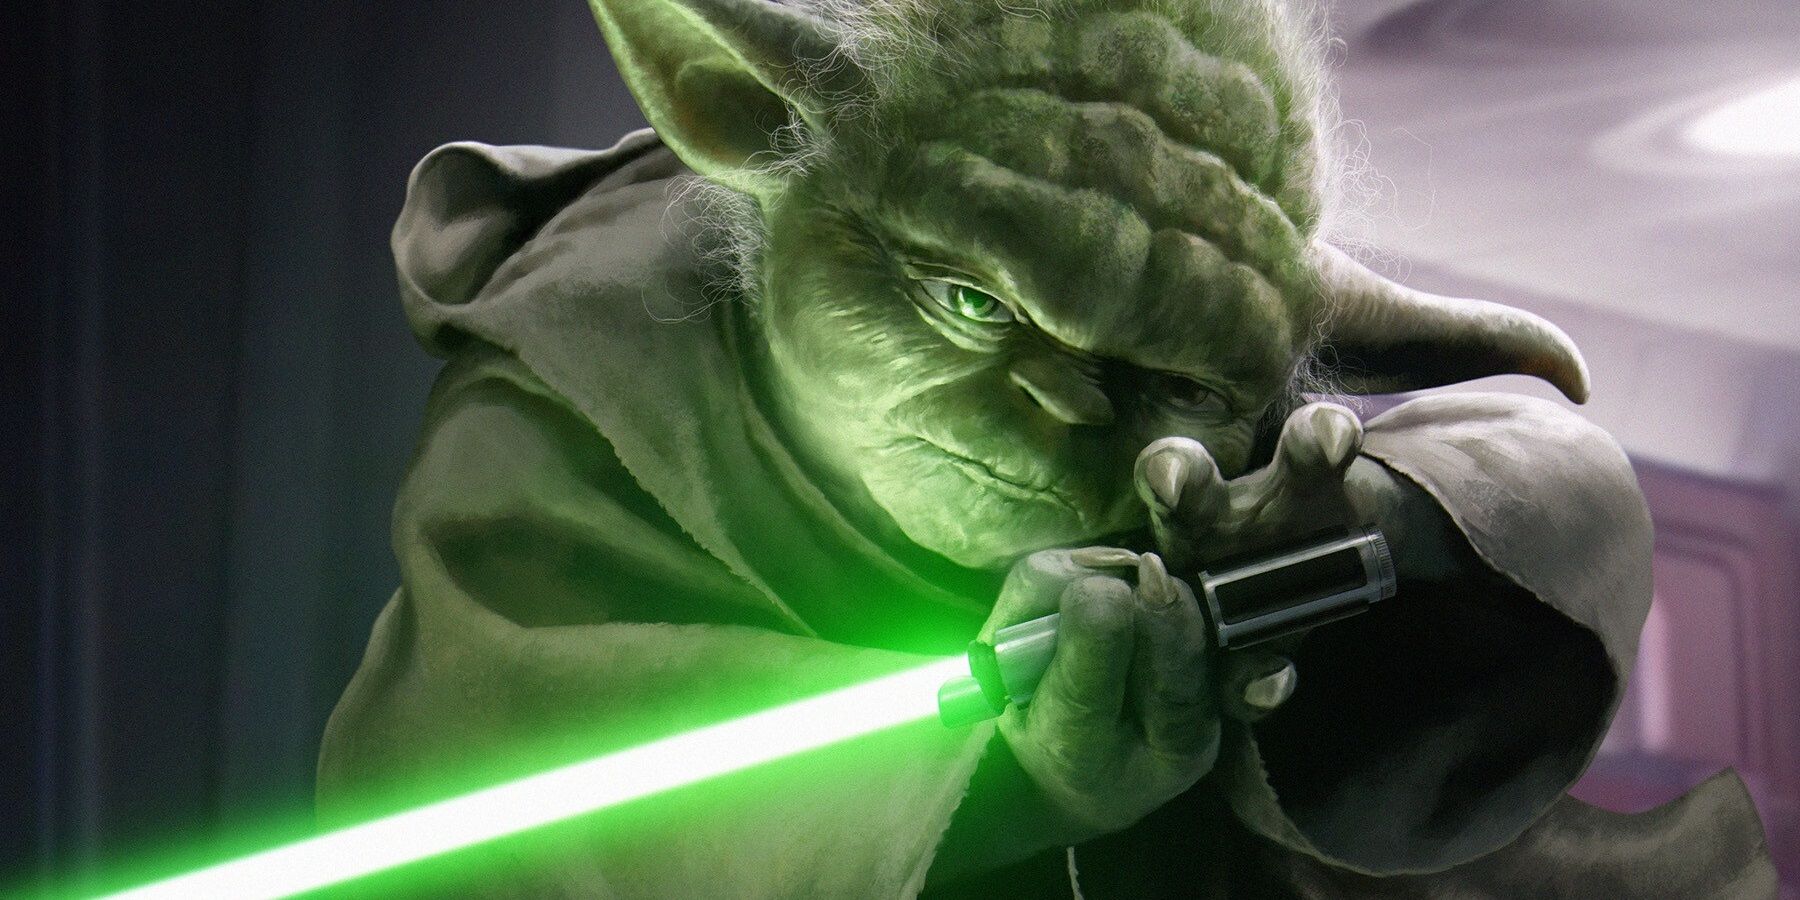 Yoda holding his lightsaber in Revenge of the Sith